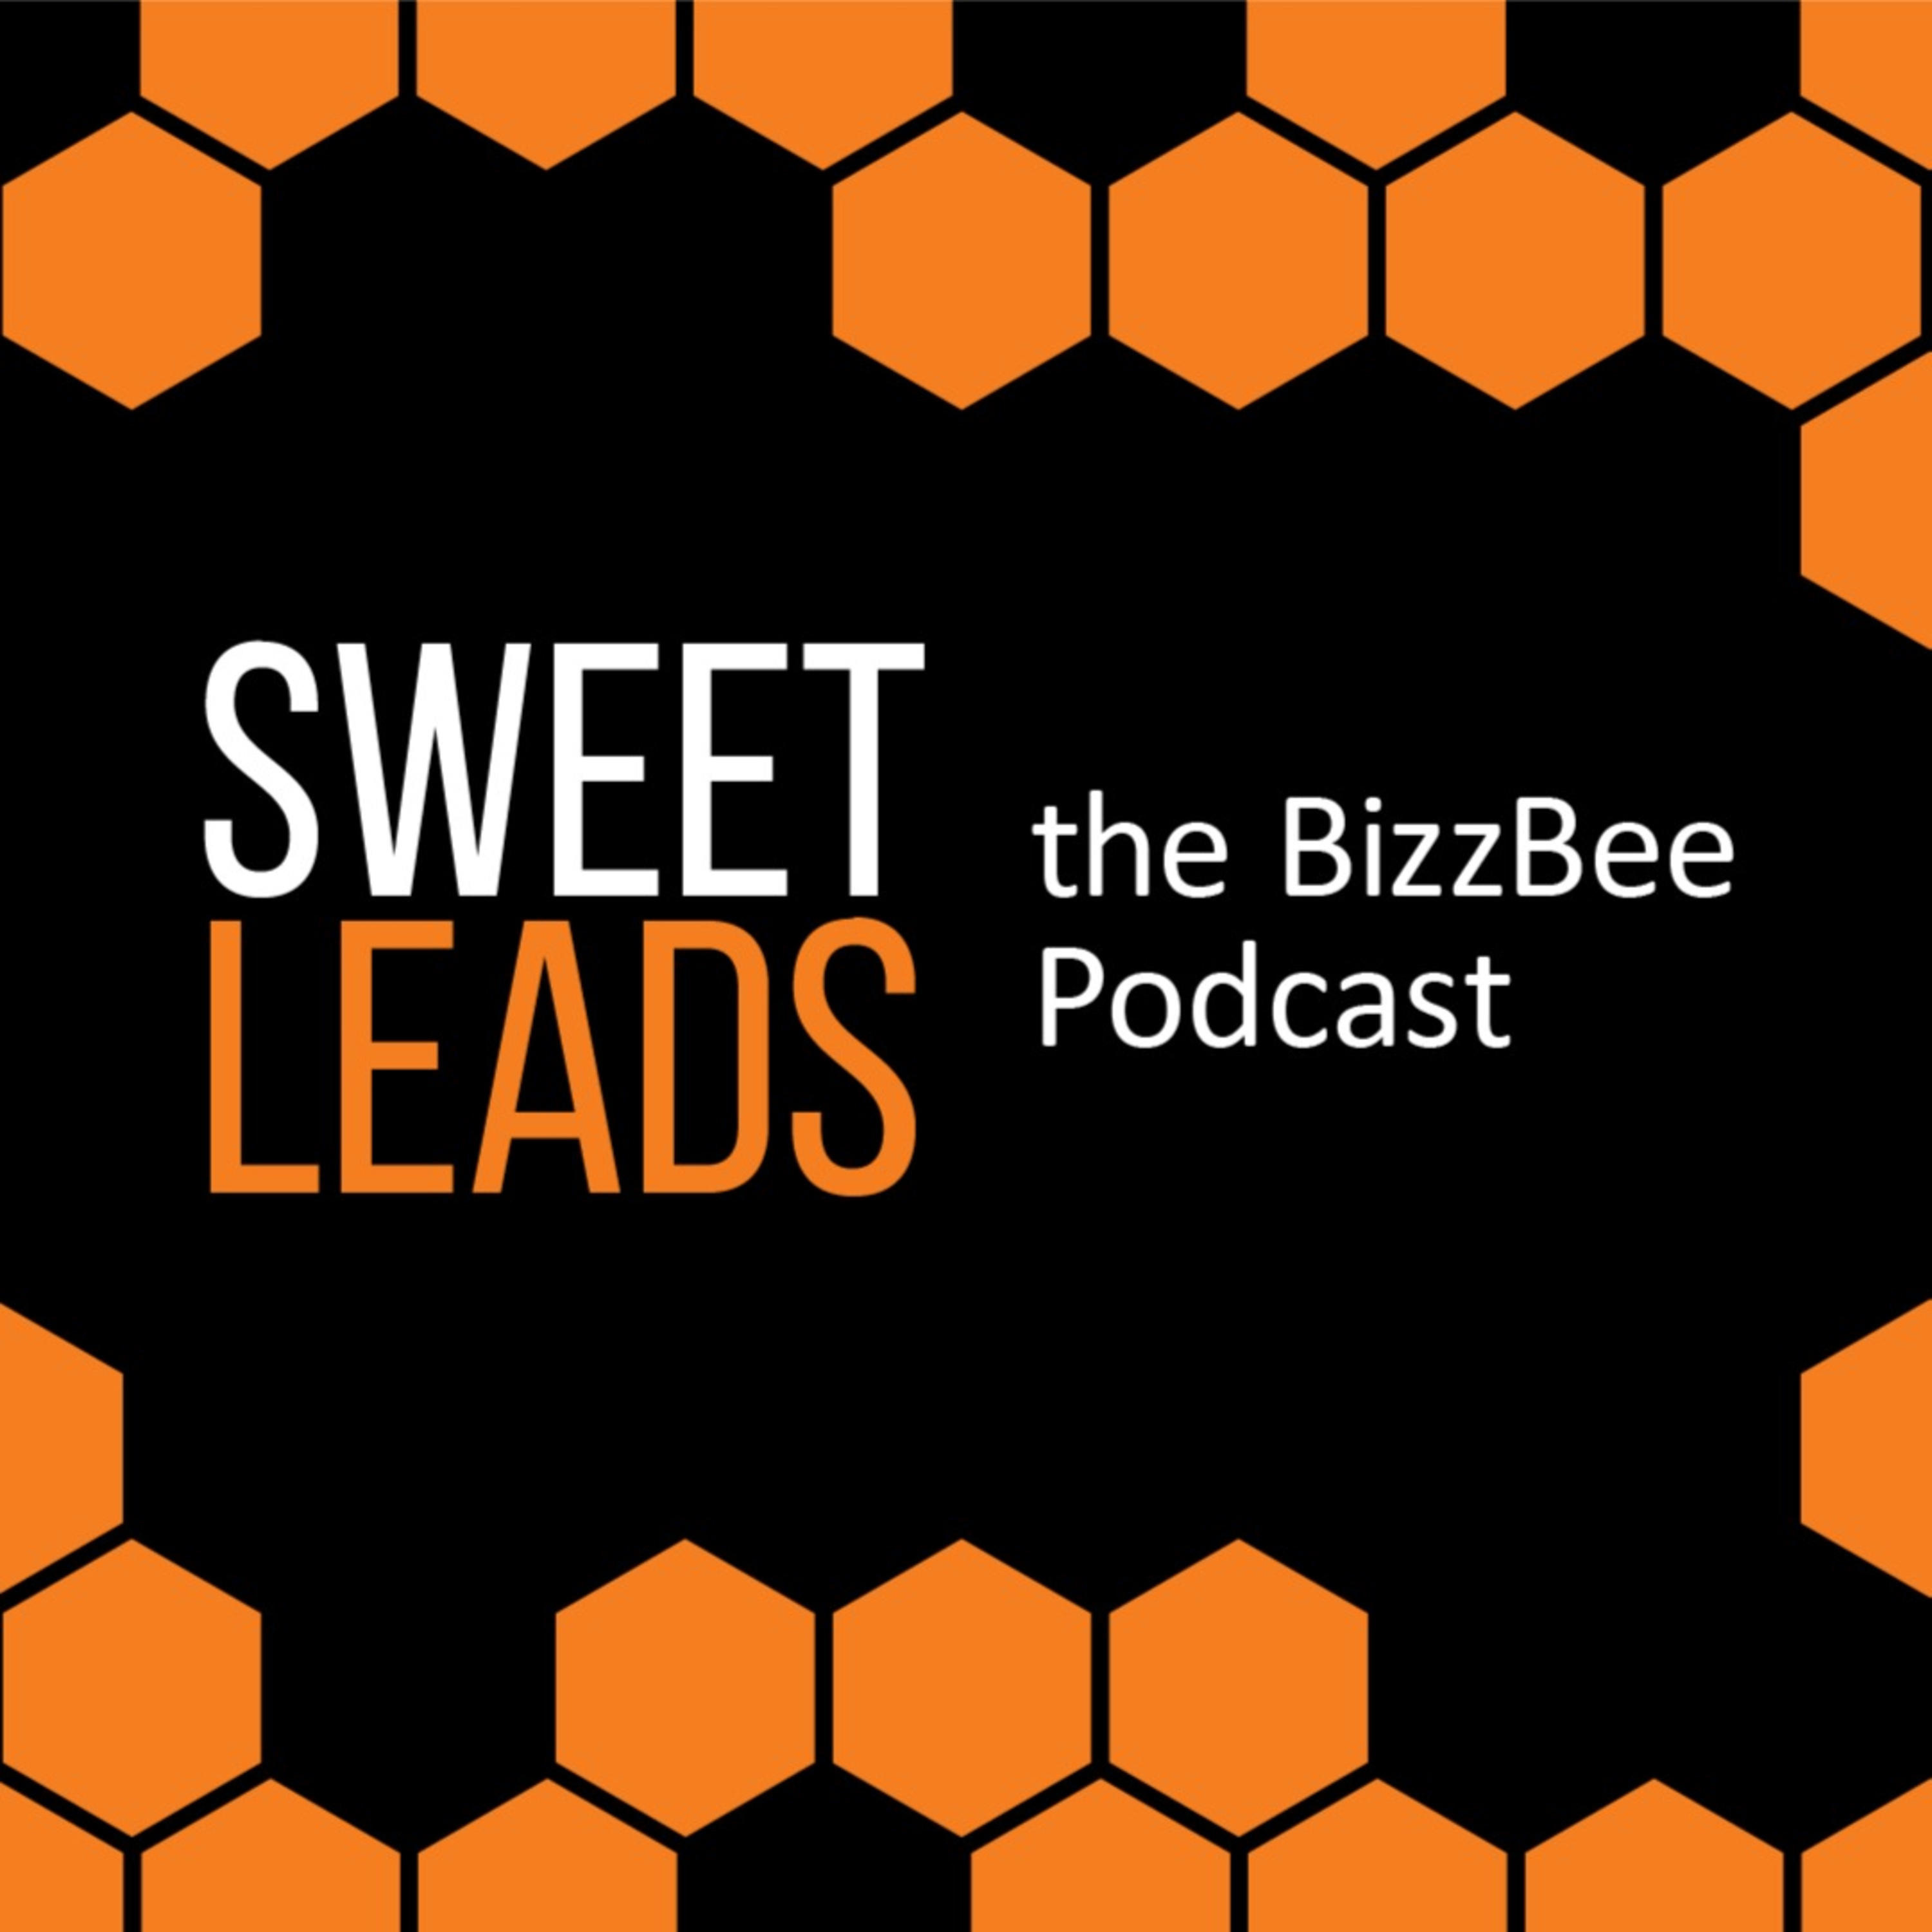 Sweet Leads - The BizzBee Podcast